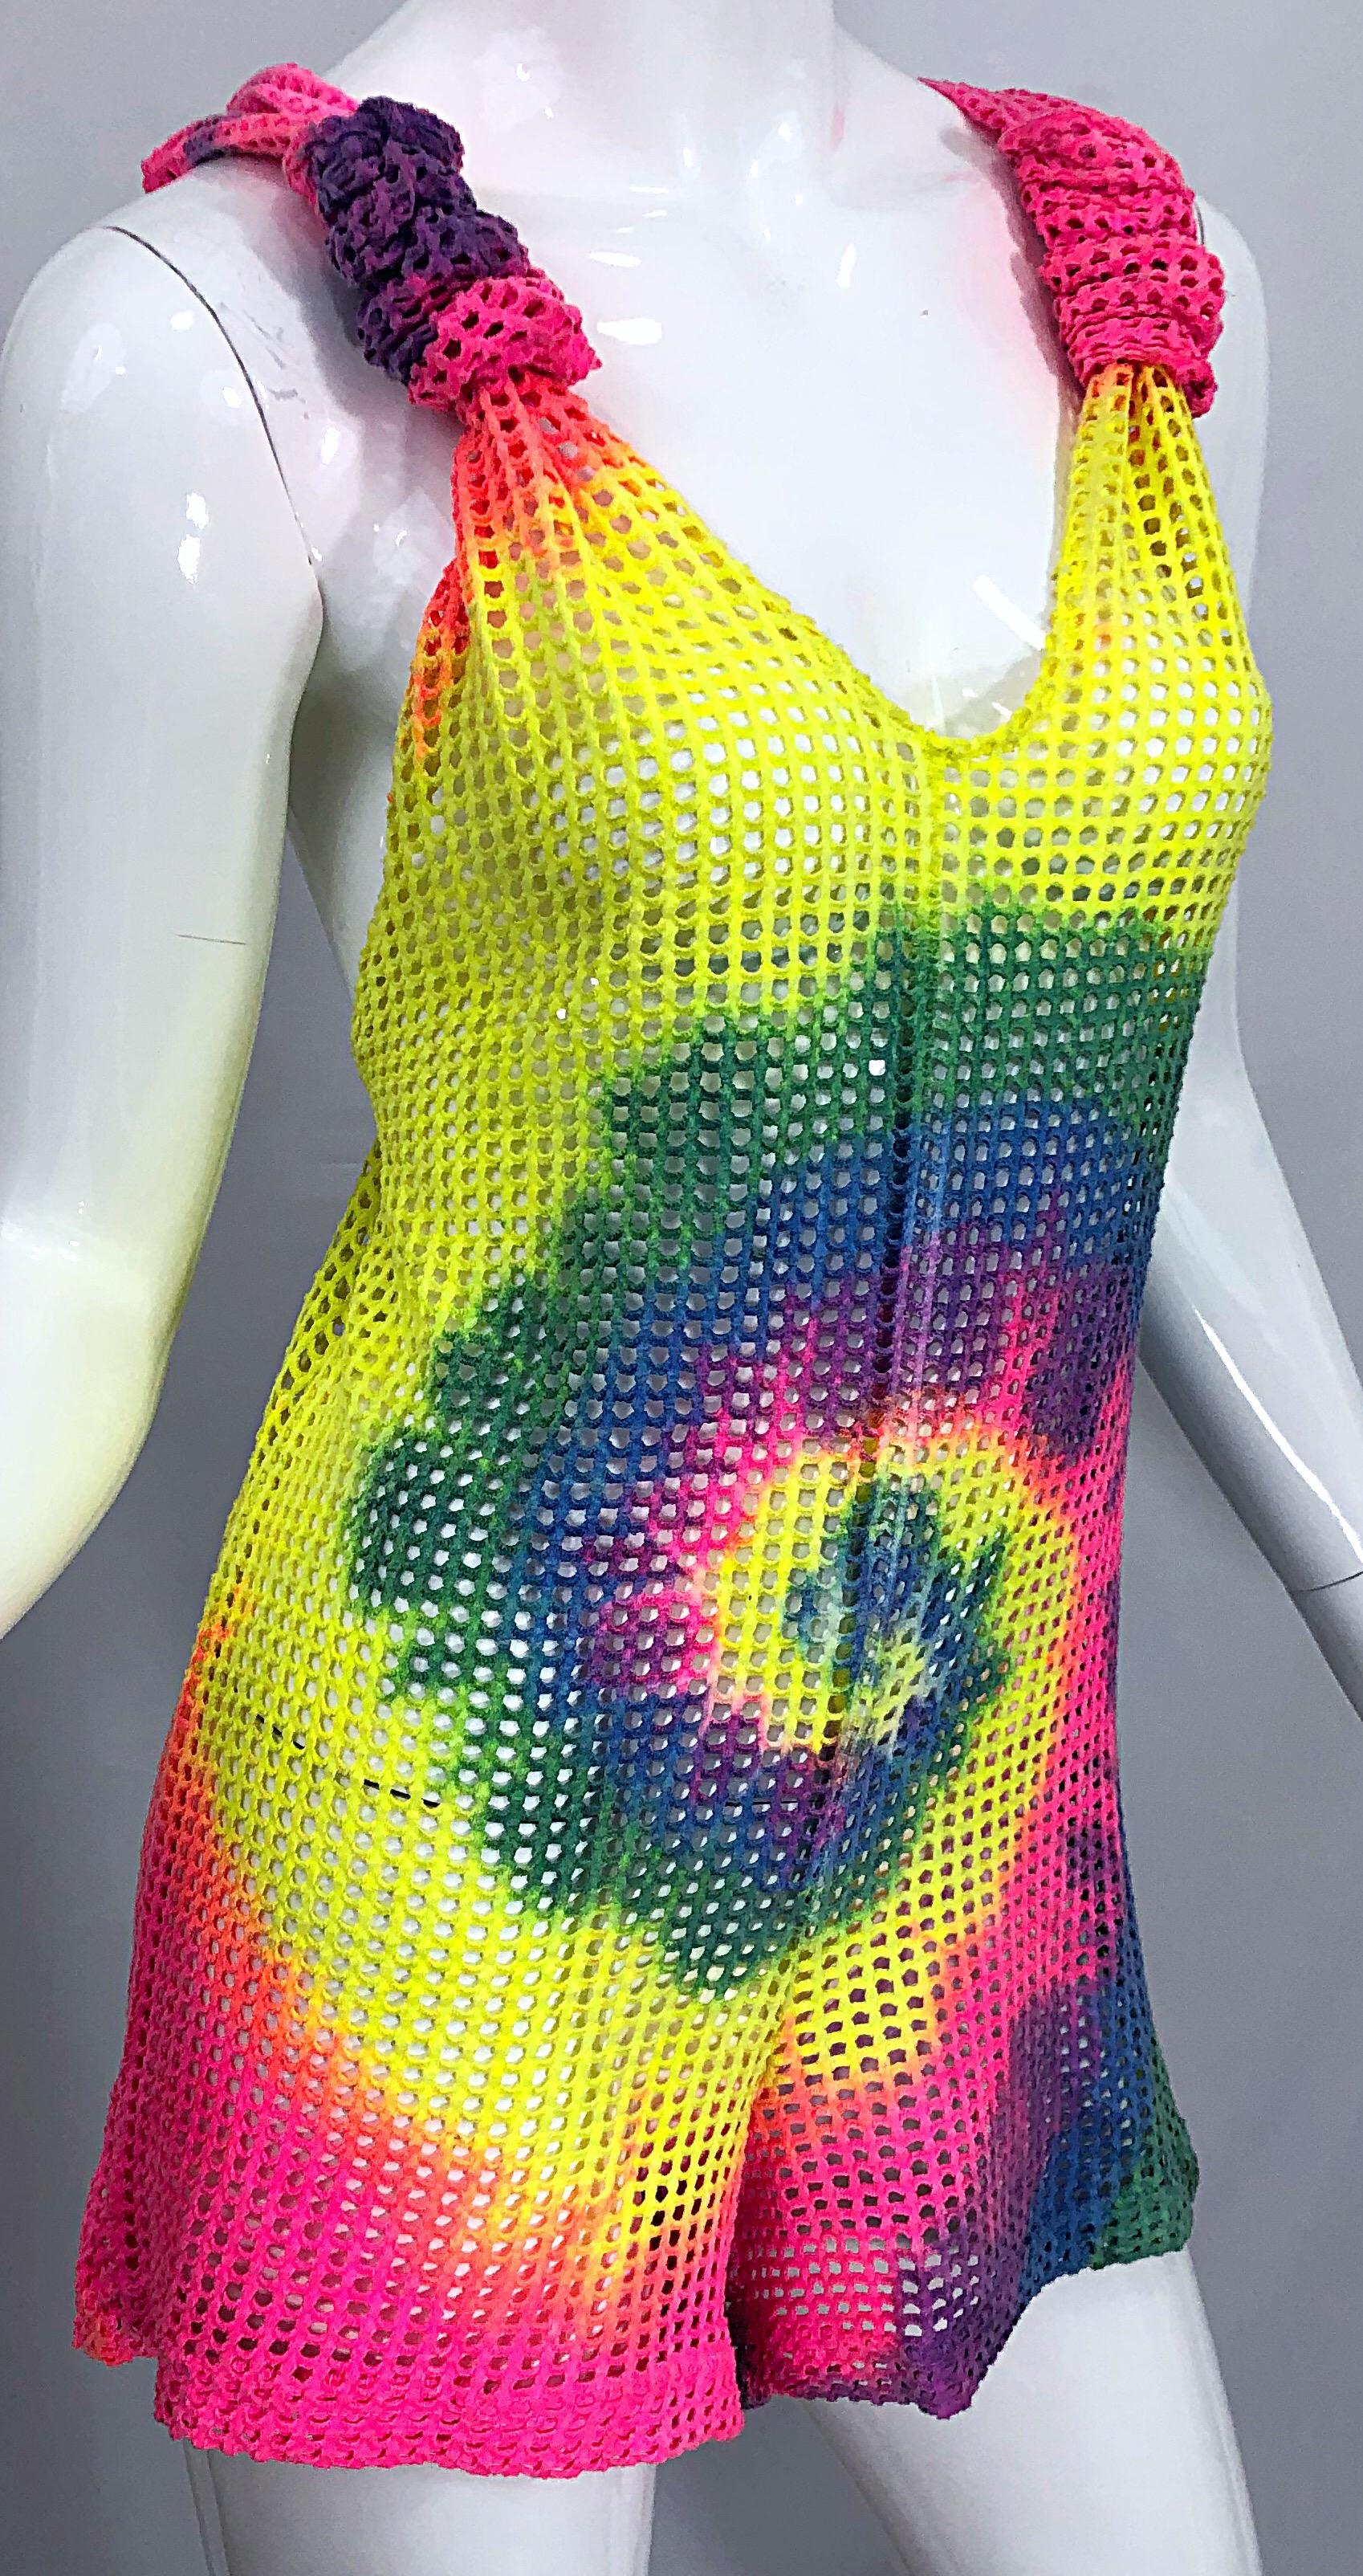 Amazing 1980s Tie Dyed Bright Colorful One Piece Fishnet Cut Out Vintage Romper In Excellent Condition For Sale In San Diego, CA